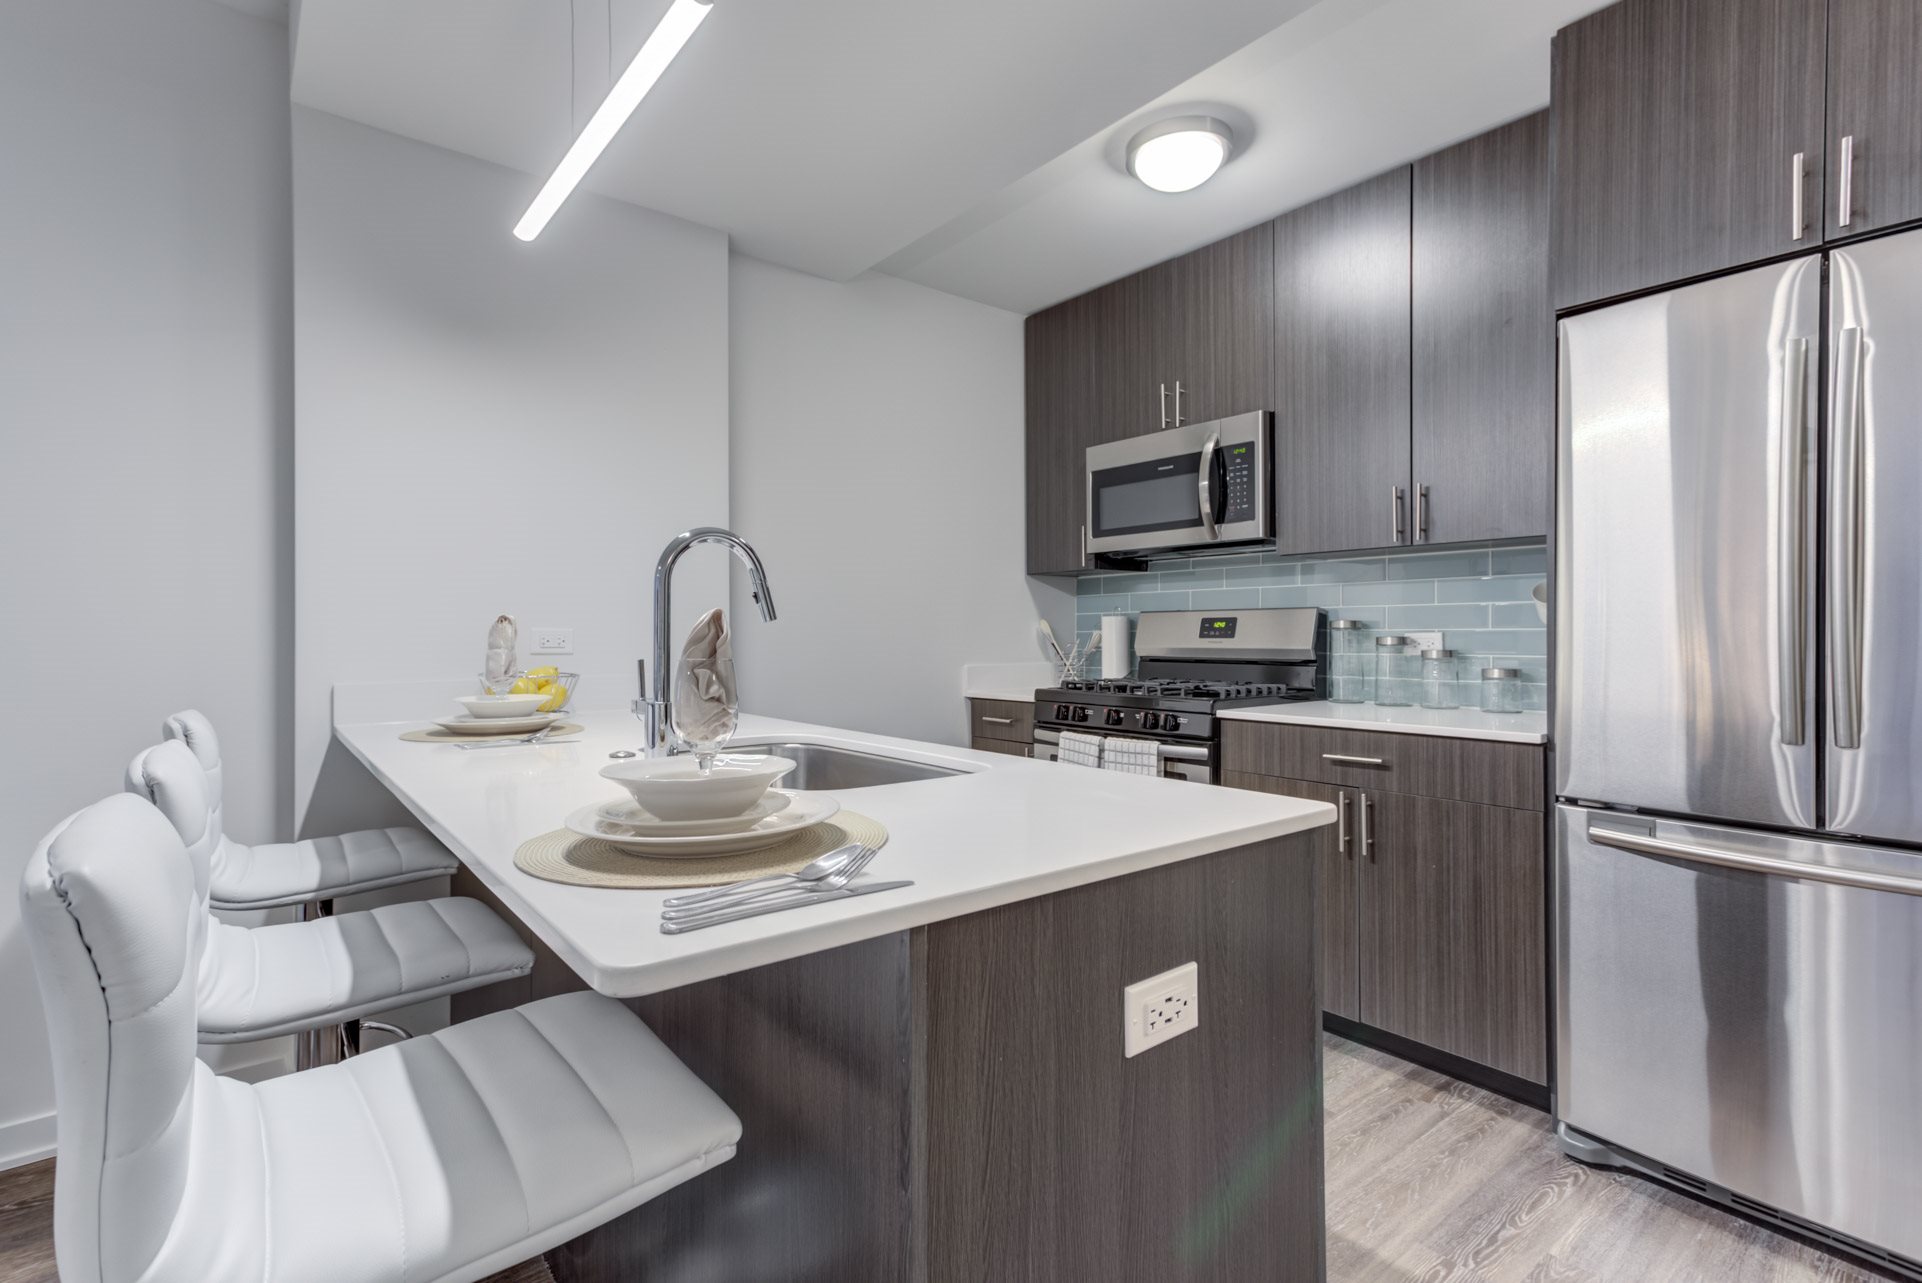 Now leasing! Looking for luxury apartments for rent near Old Town Chicago? Wells Street Pet Friendly Apartments available now